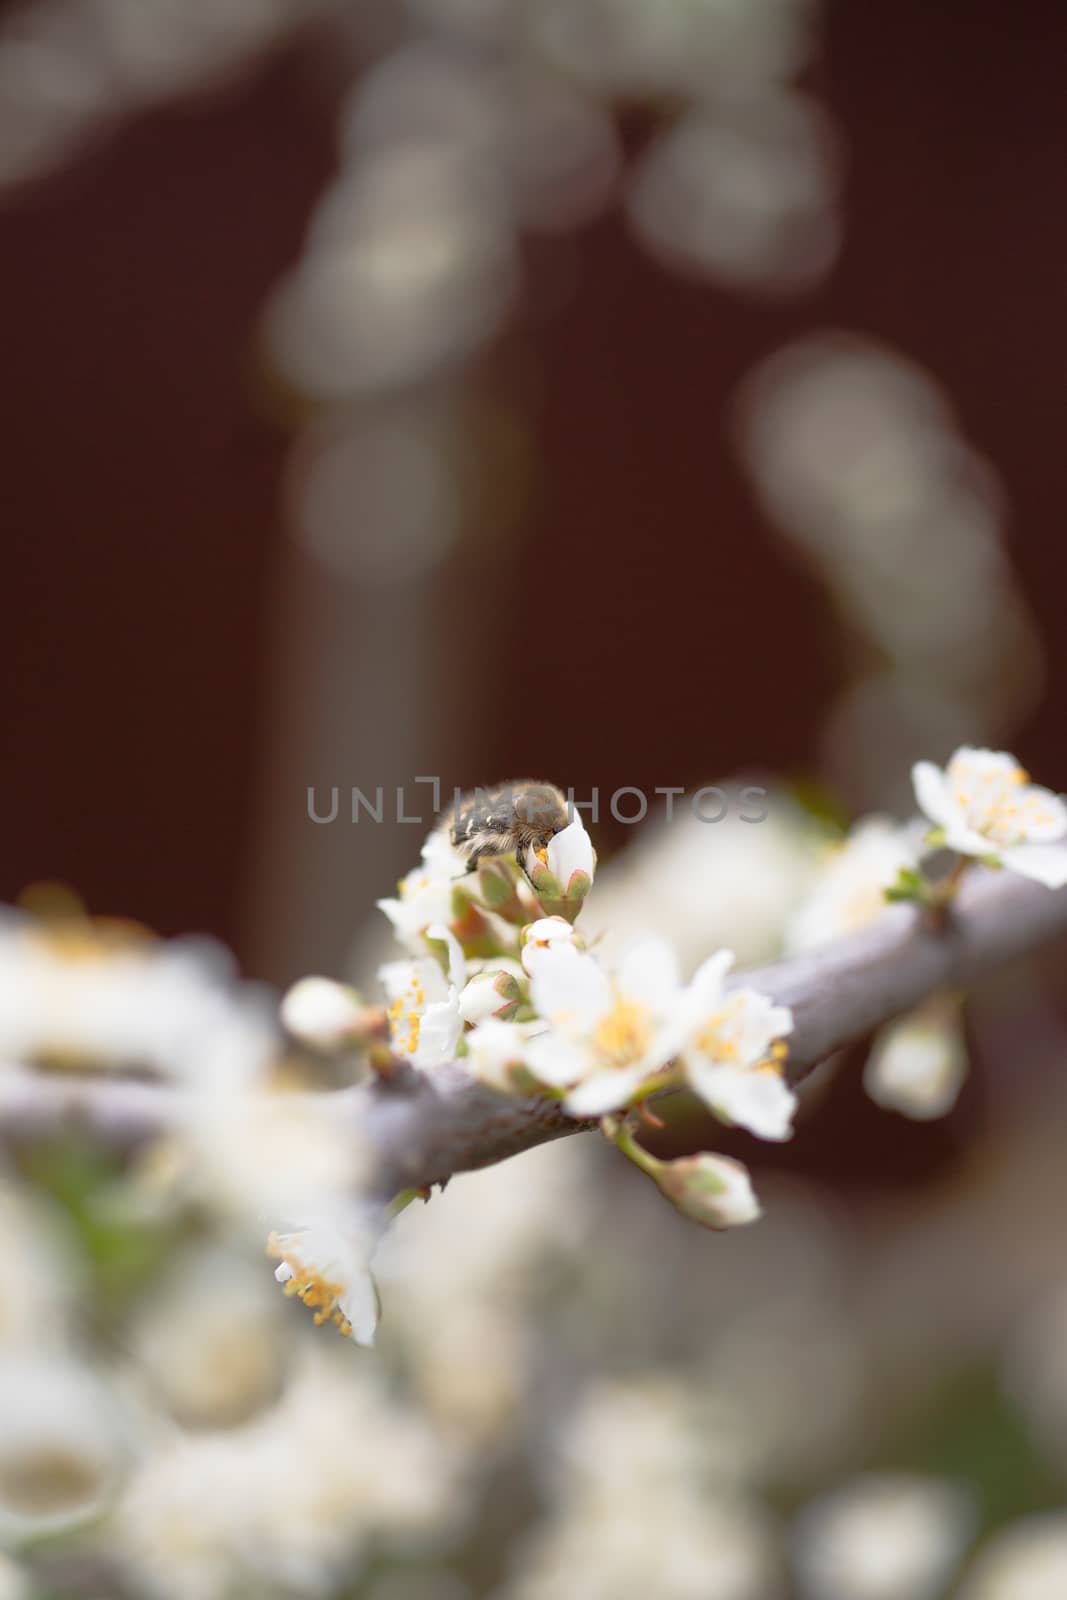 Cherry flower inflorescences on blurred background. by alexsdriver